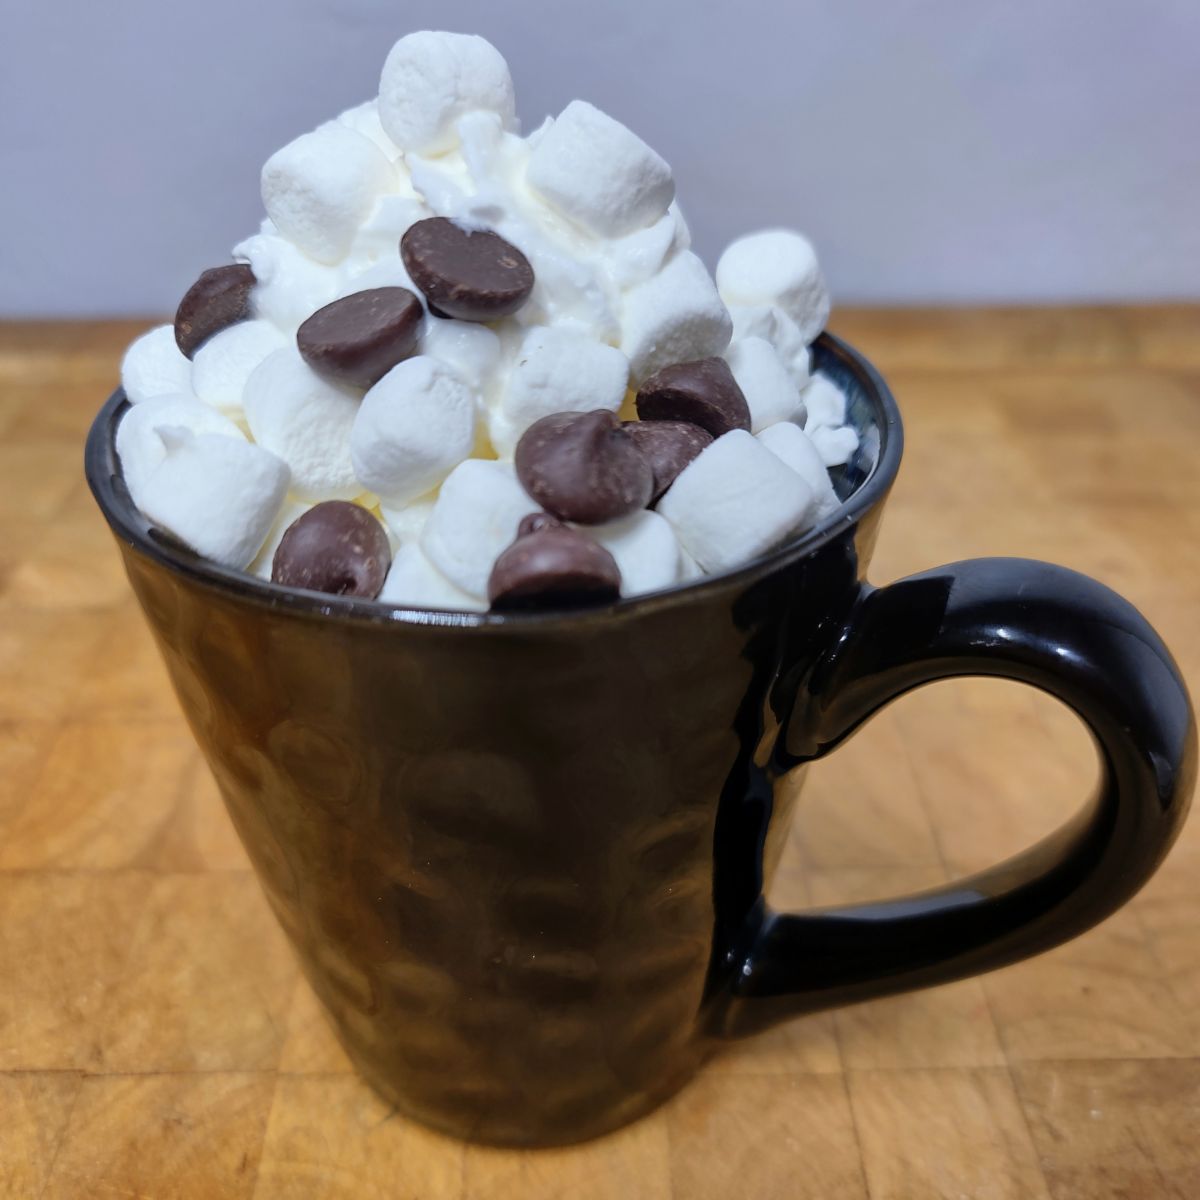 Orange hot chocolate in a mug with whipped cream, mini marshmallows and mini chocolate chips on top.